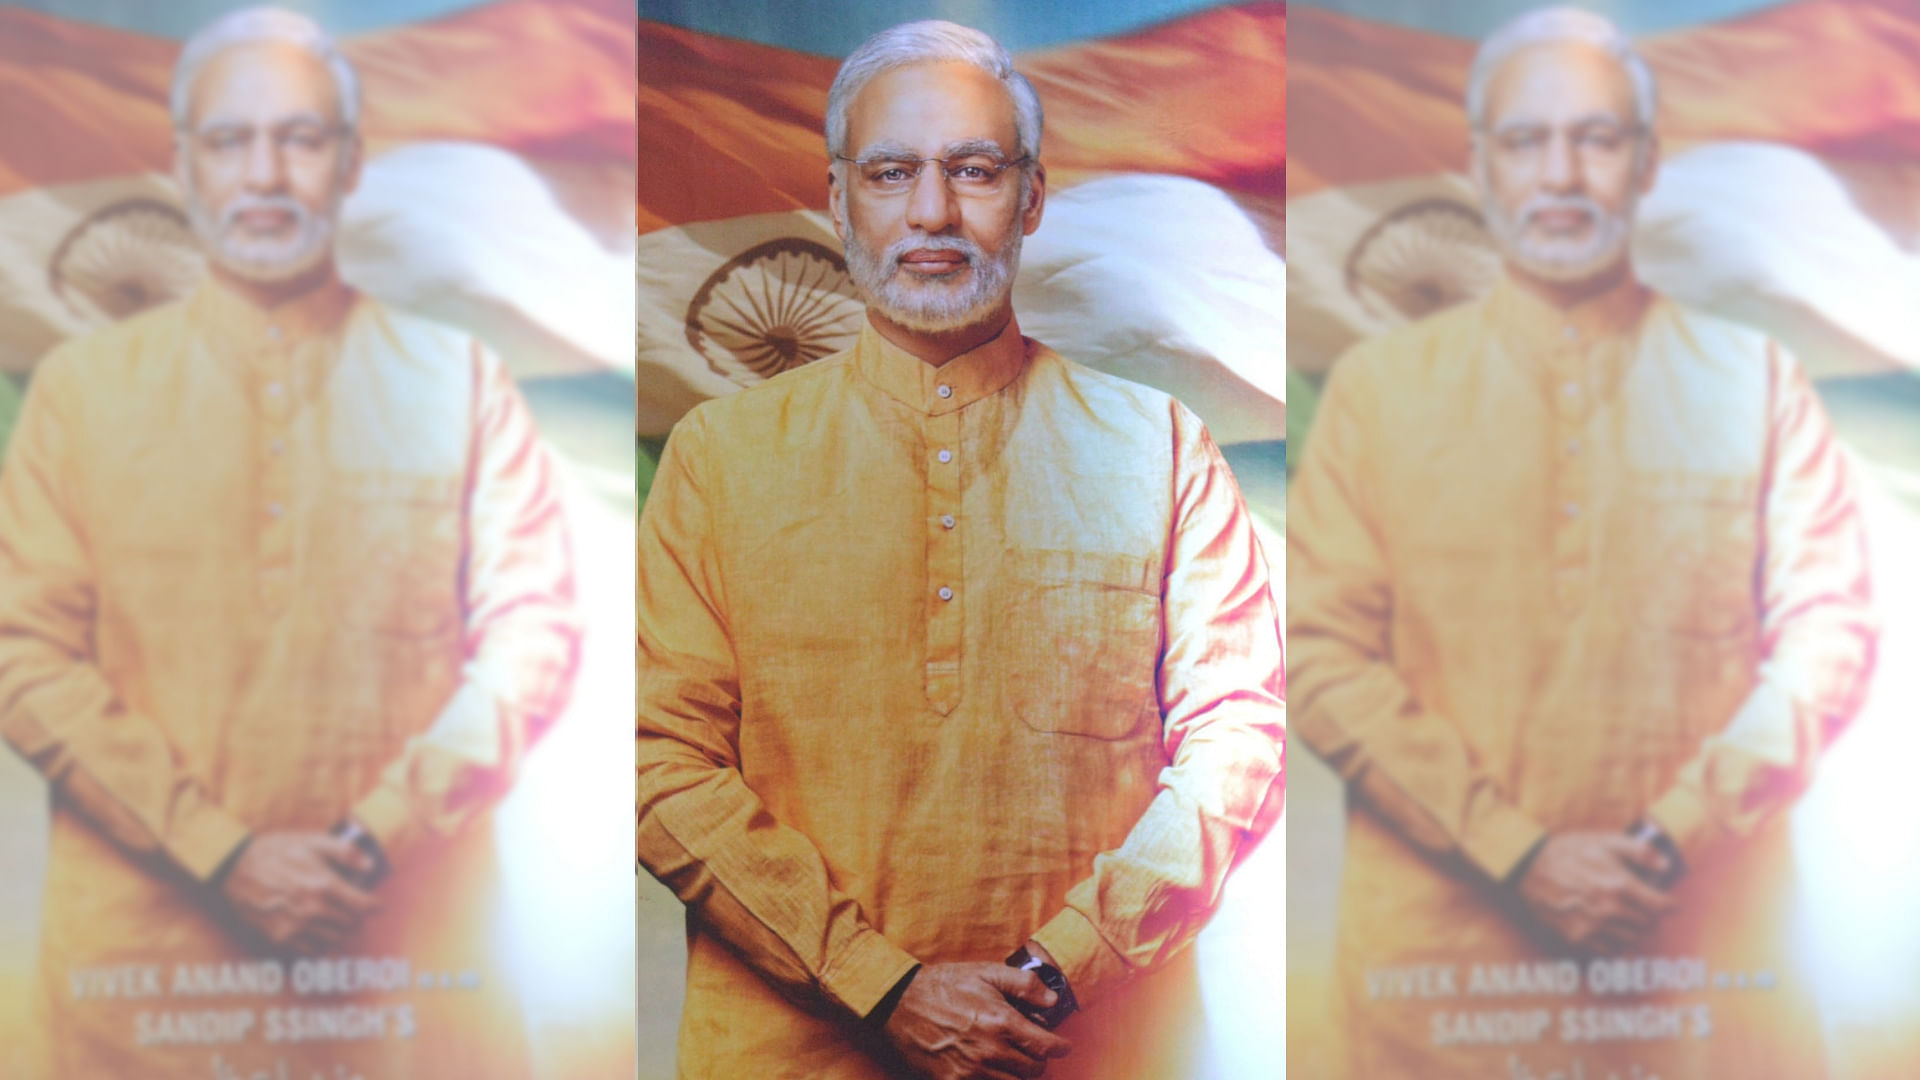 A poster for the upcoming biopic on Modi featuring Vivek Oberoi.